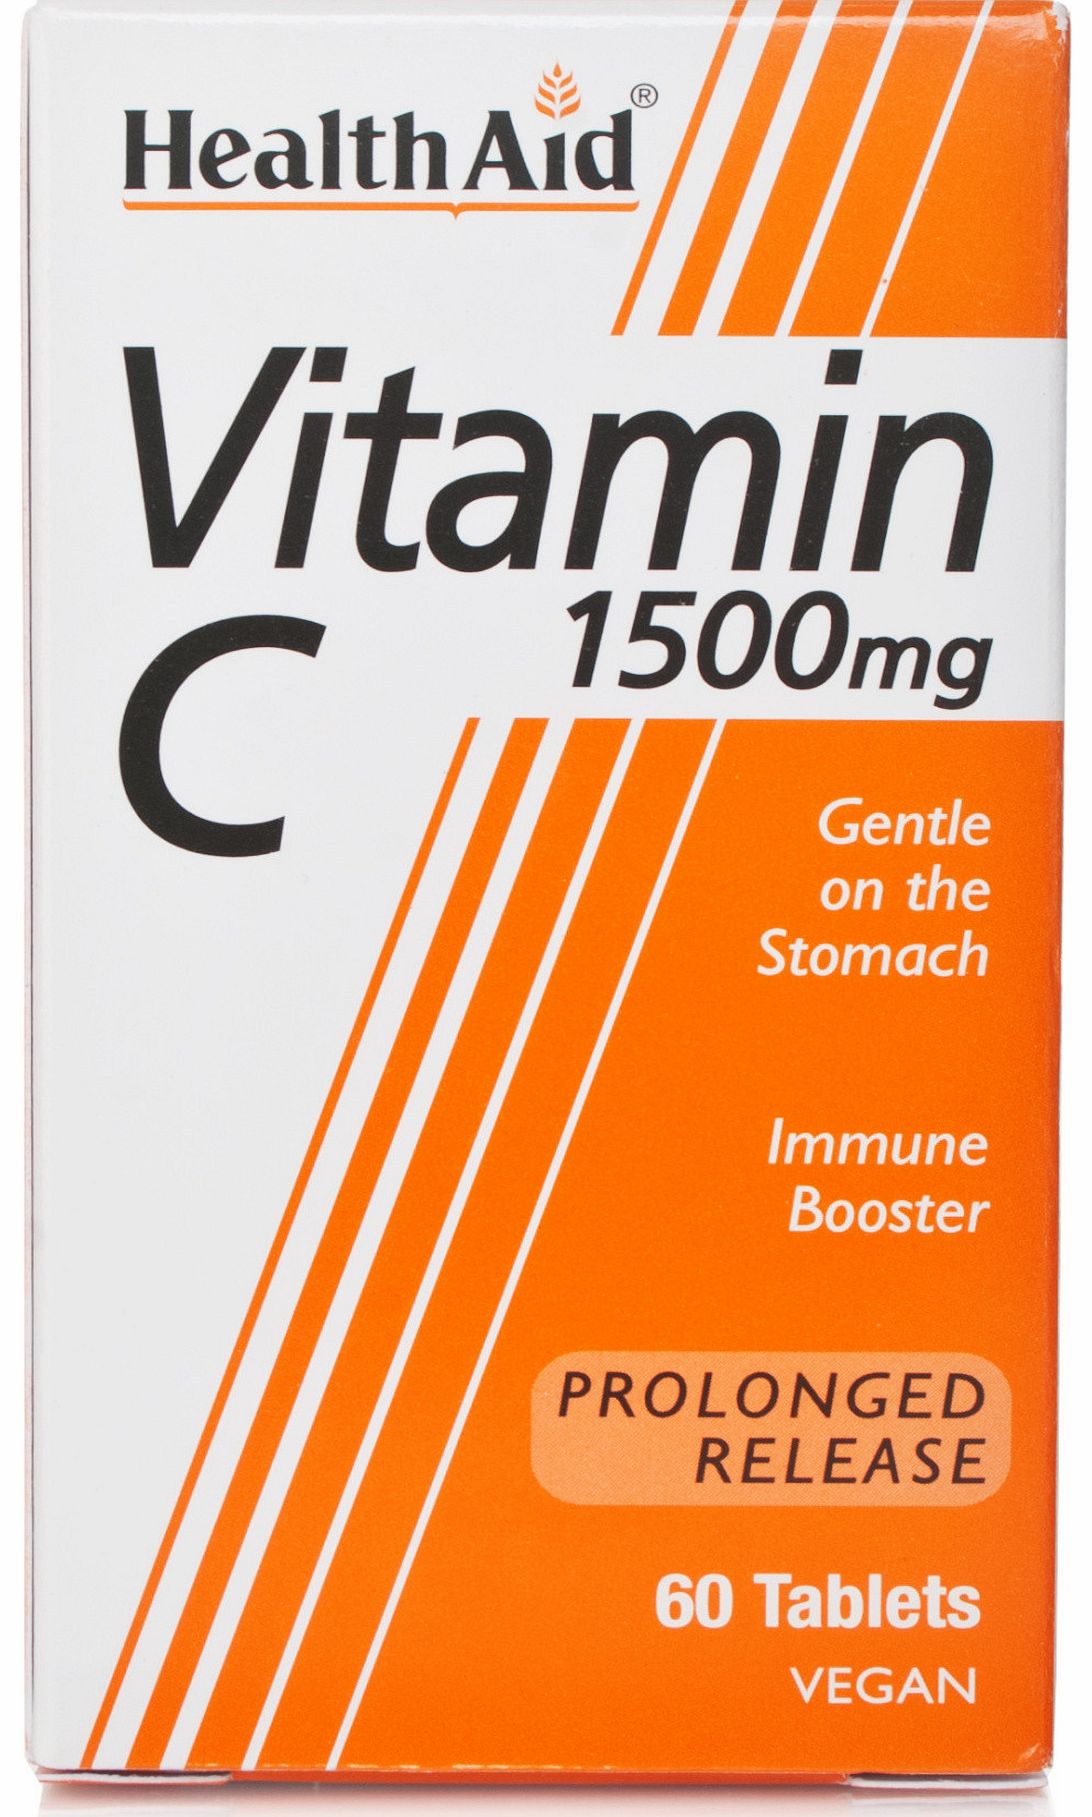 VITAMIN CA major antioxidant vitamin, Vitamin C is water-soluble and cannot be stored by the body, so a regular daily supply is essential for the maintenance of good health.Vitamin C reinforces the immune system as well as helping to maintain healthy